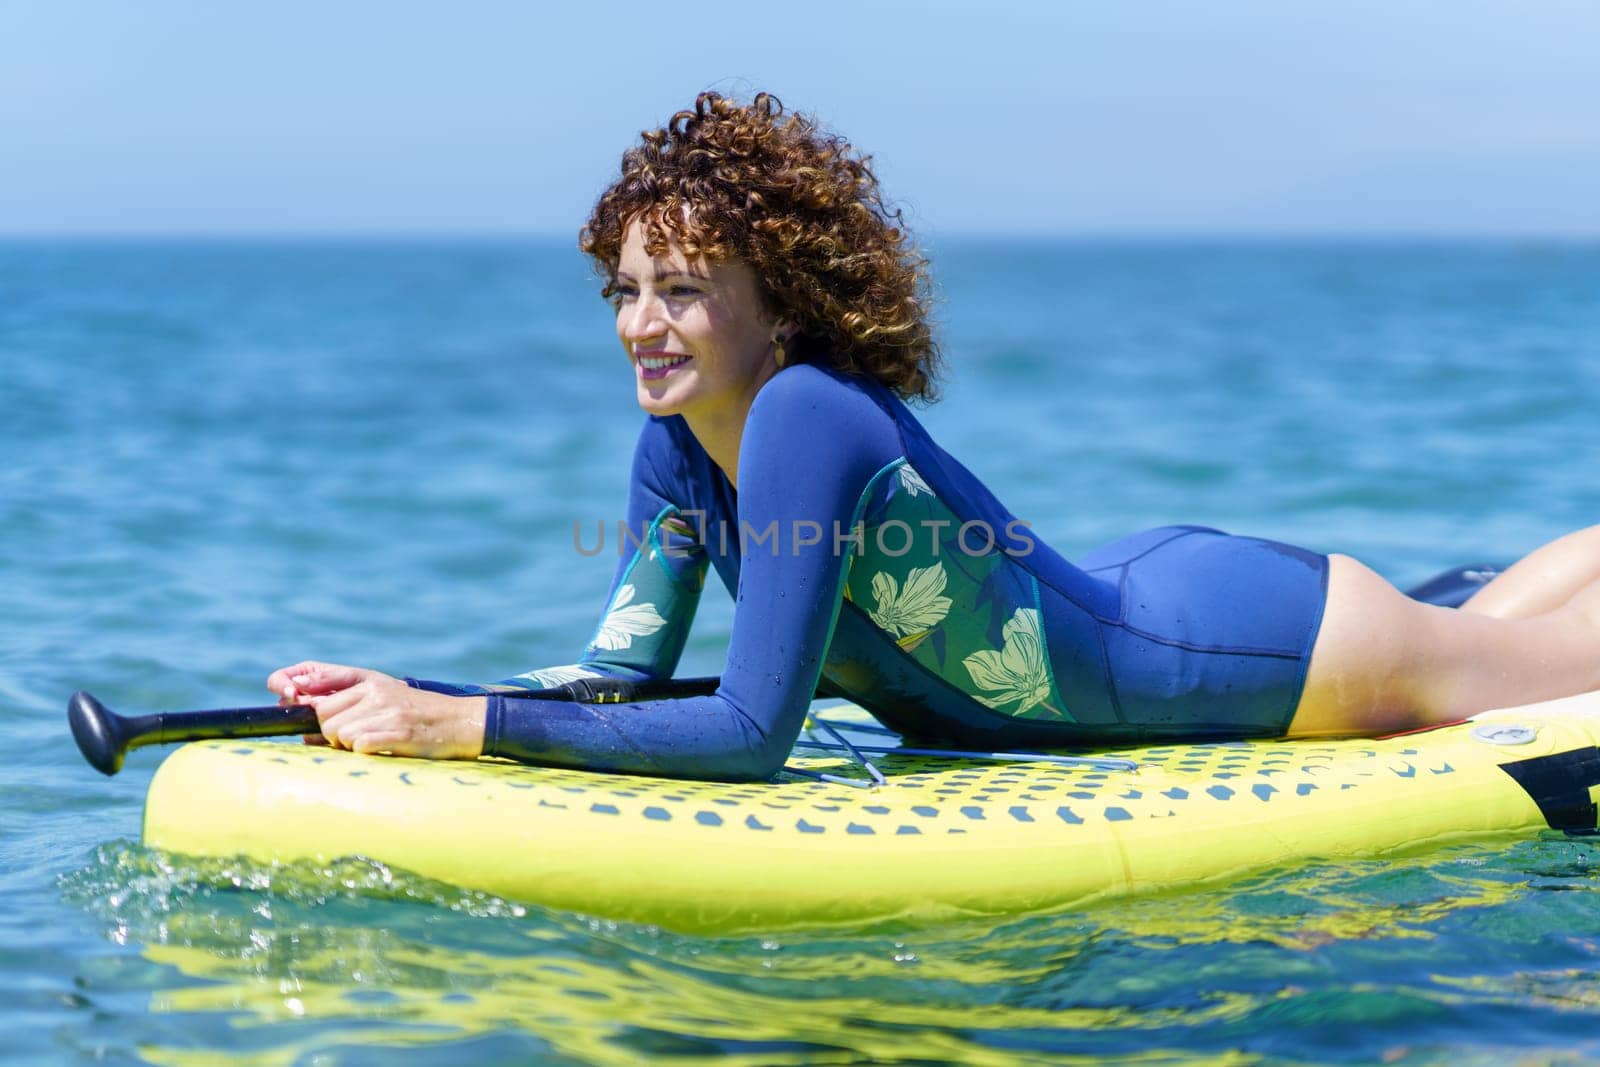 Side view of smiling woman with dark curly hair lying on SUP board in seawater and looking away in sunshine